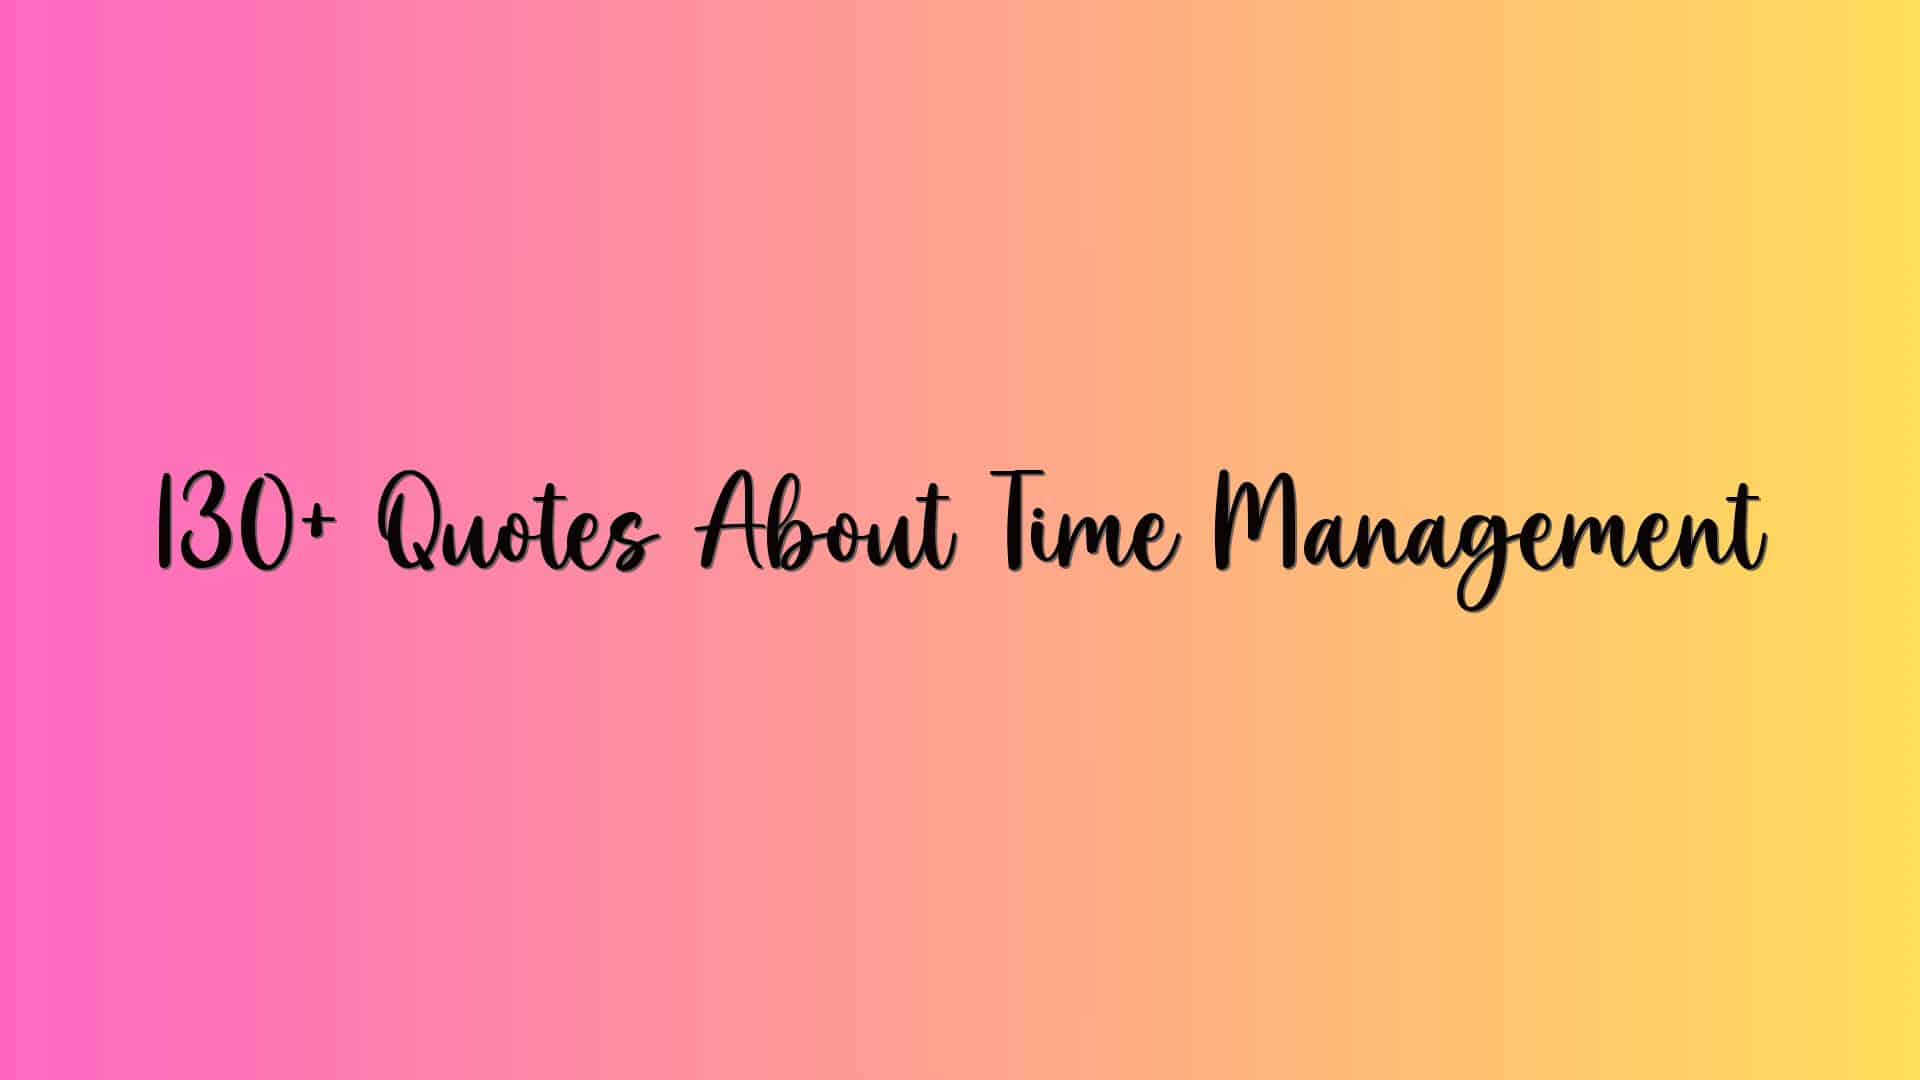 130+ Quotes About Time Management